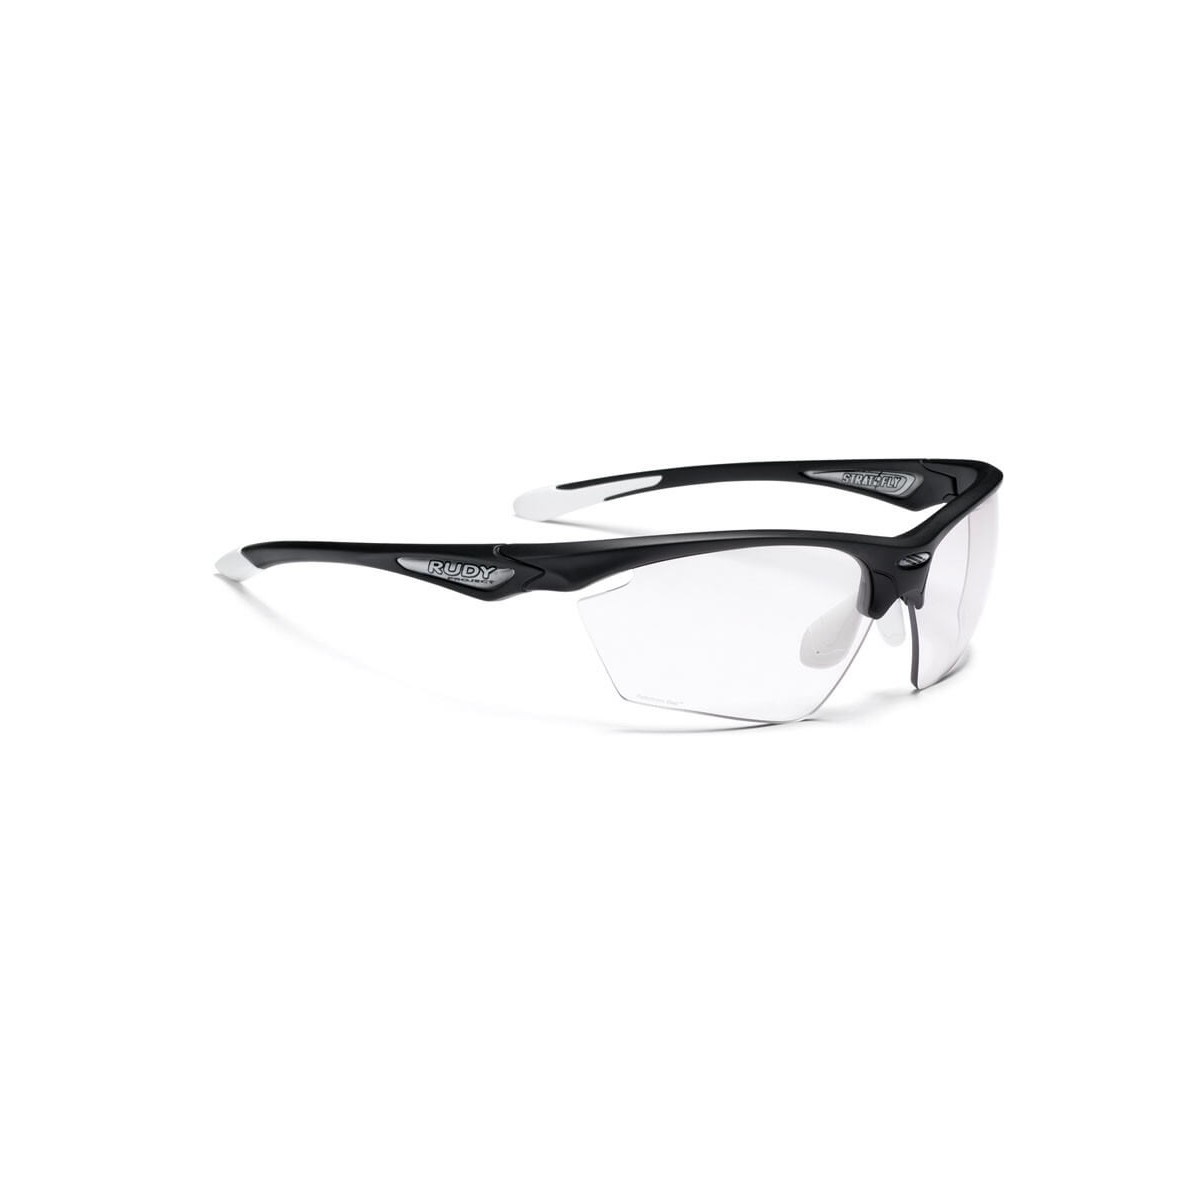 Brille Stratofly Black Gloss RPO Photoclear Rudy Project